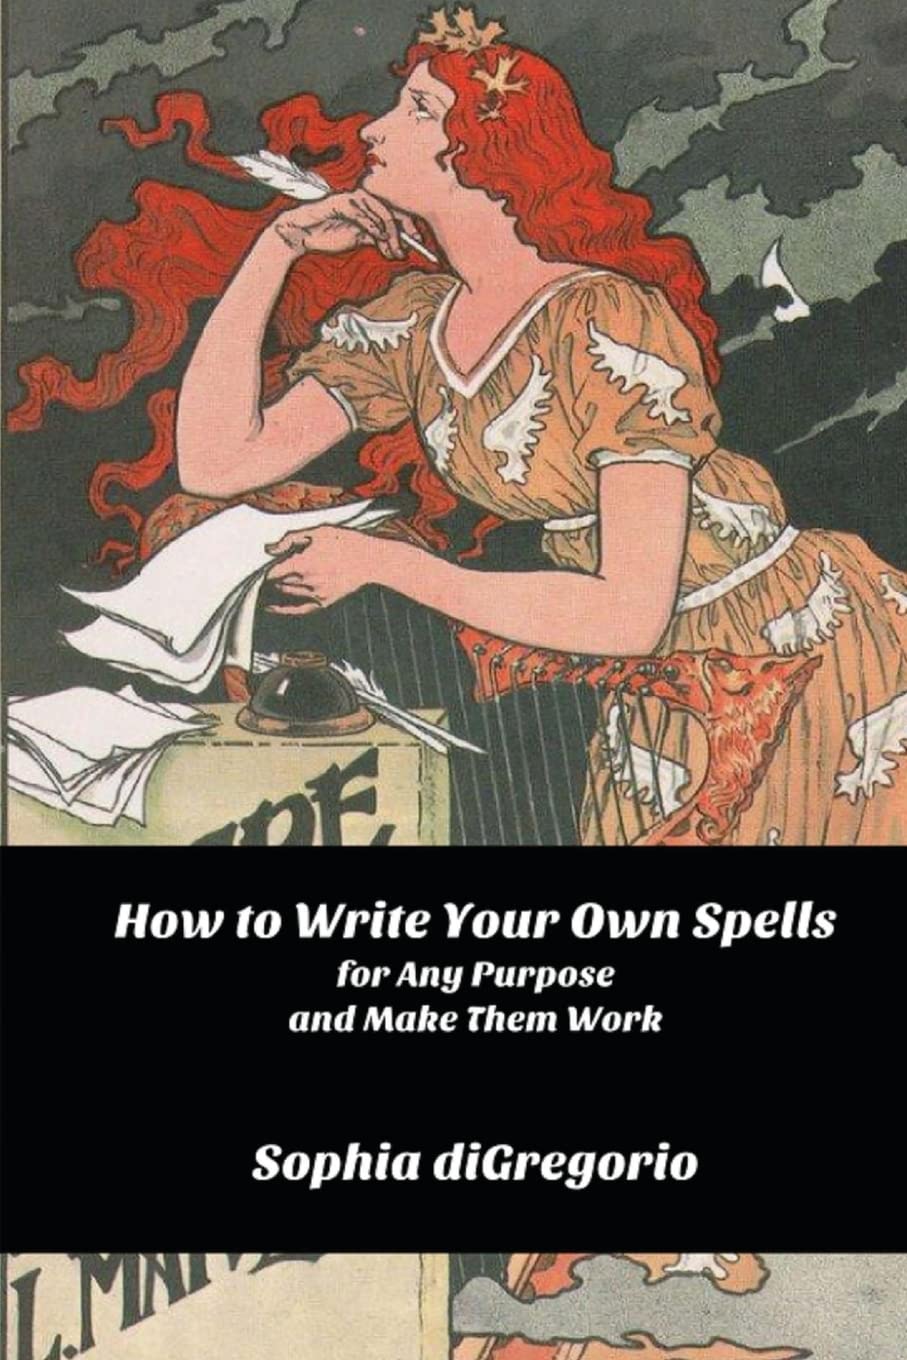 How to Write Your Own Spells for Any Purpose and Make Them Work SureShot Books